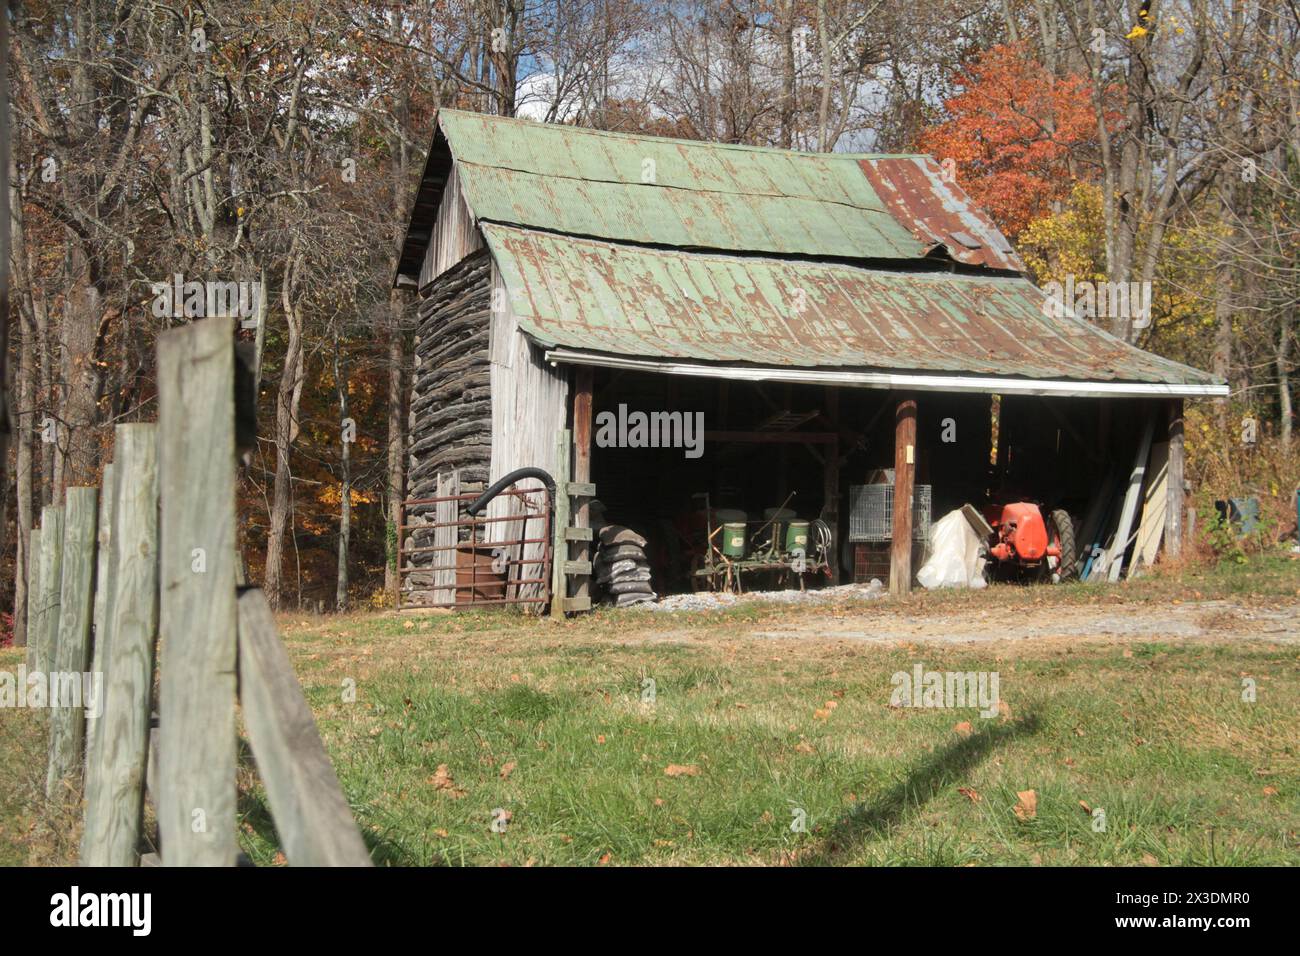 Shed on a private property in rural Virginia, USA Stock Photo